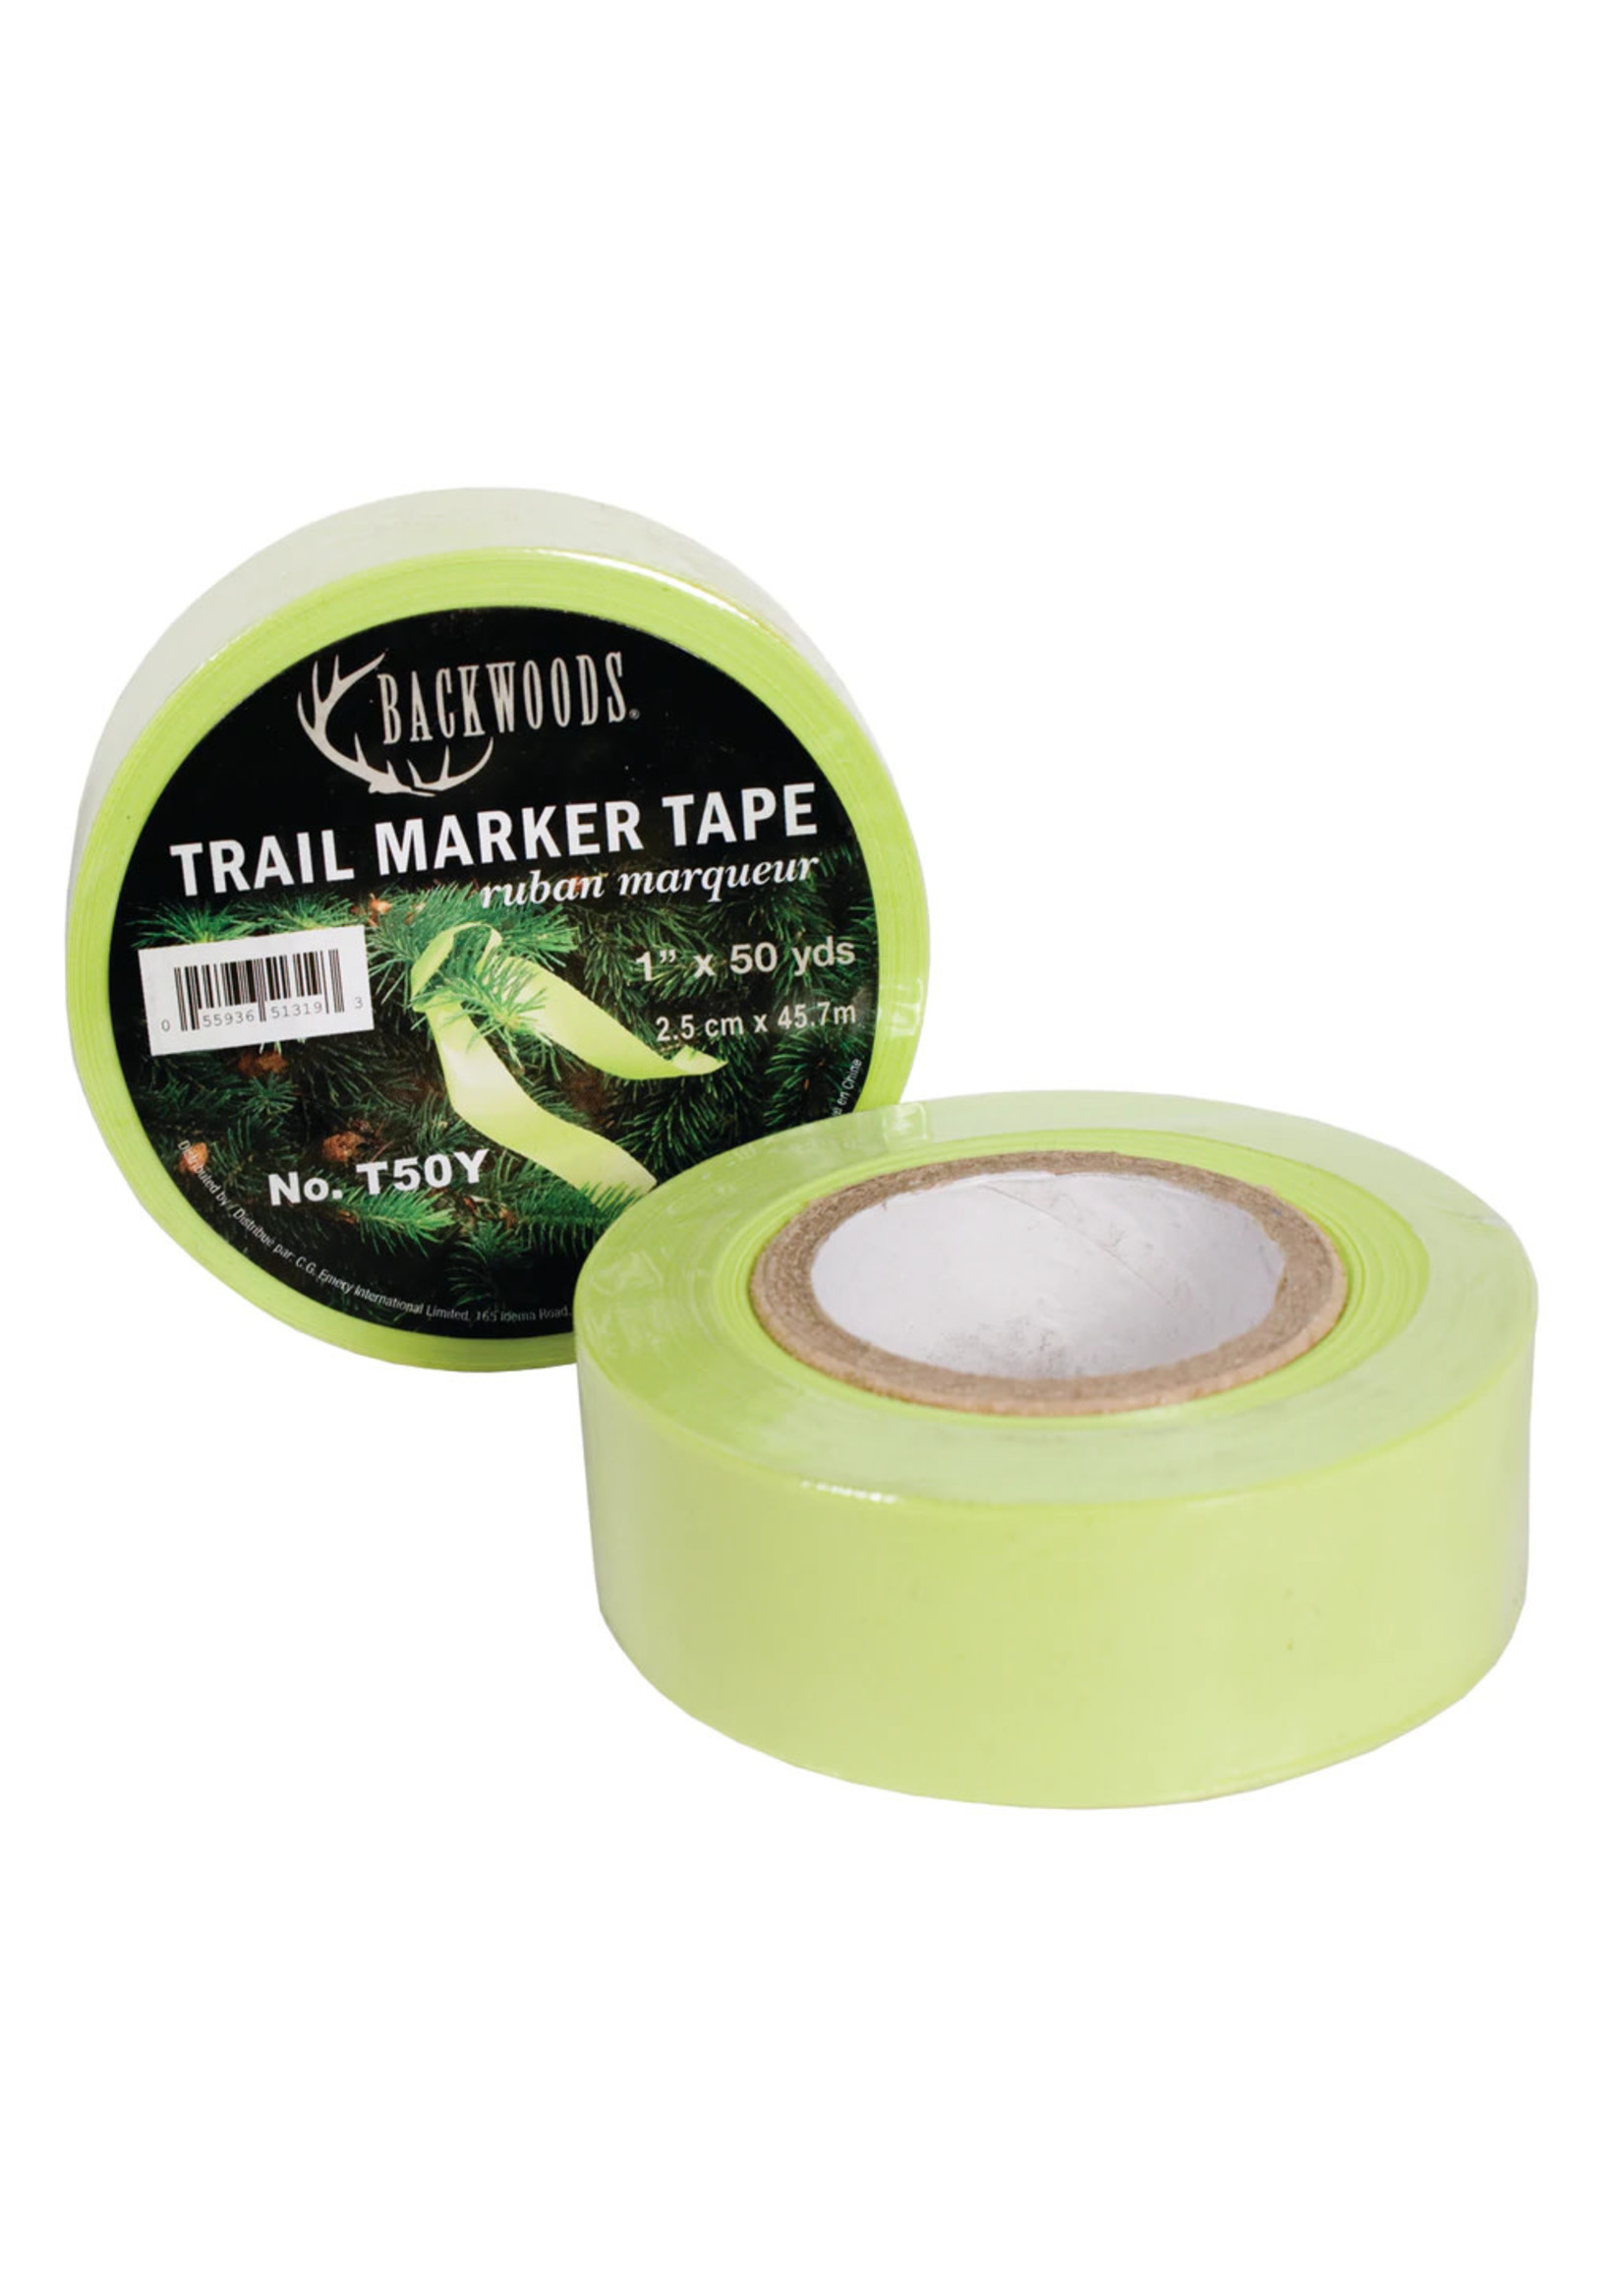 Backwoods trail marker tape yellow